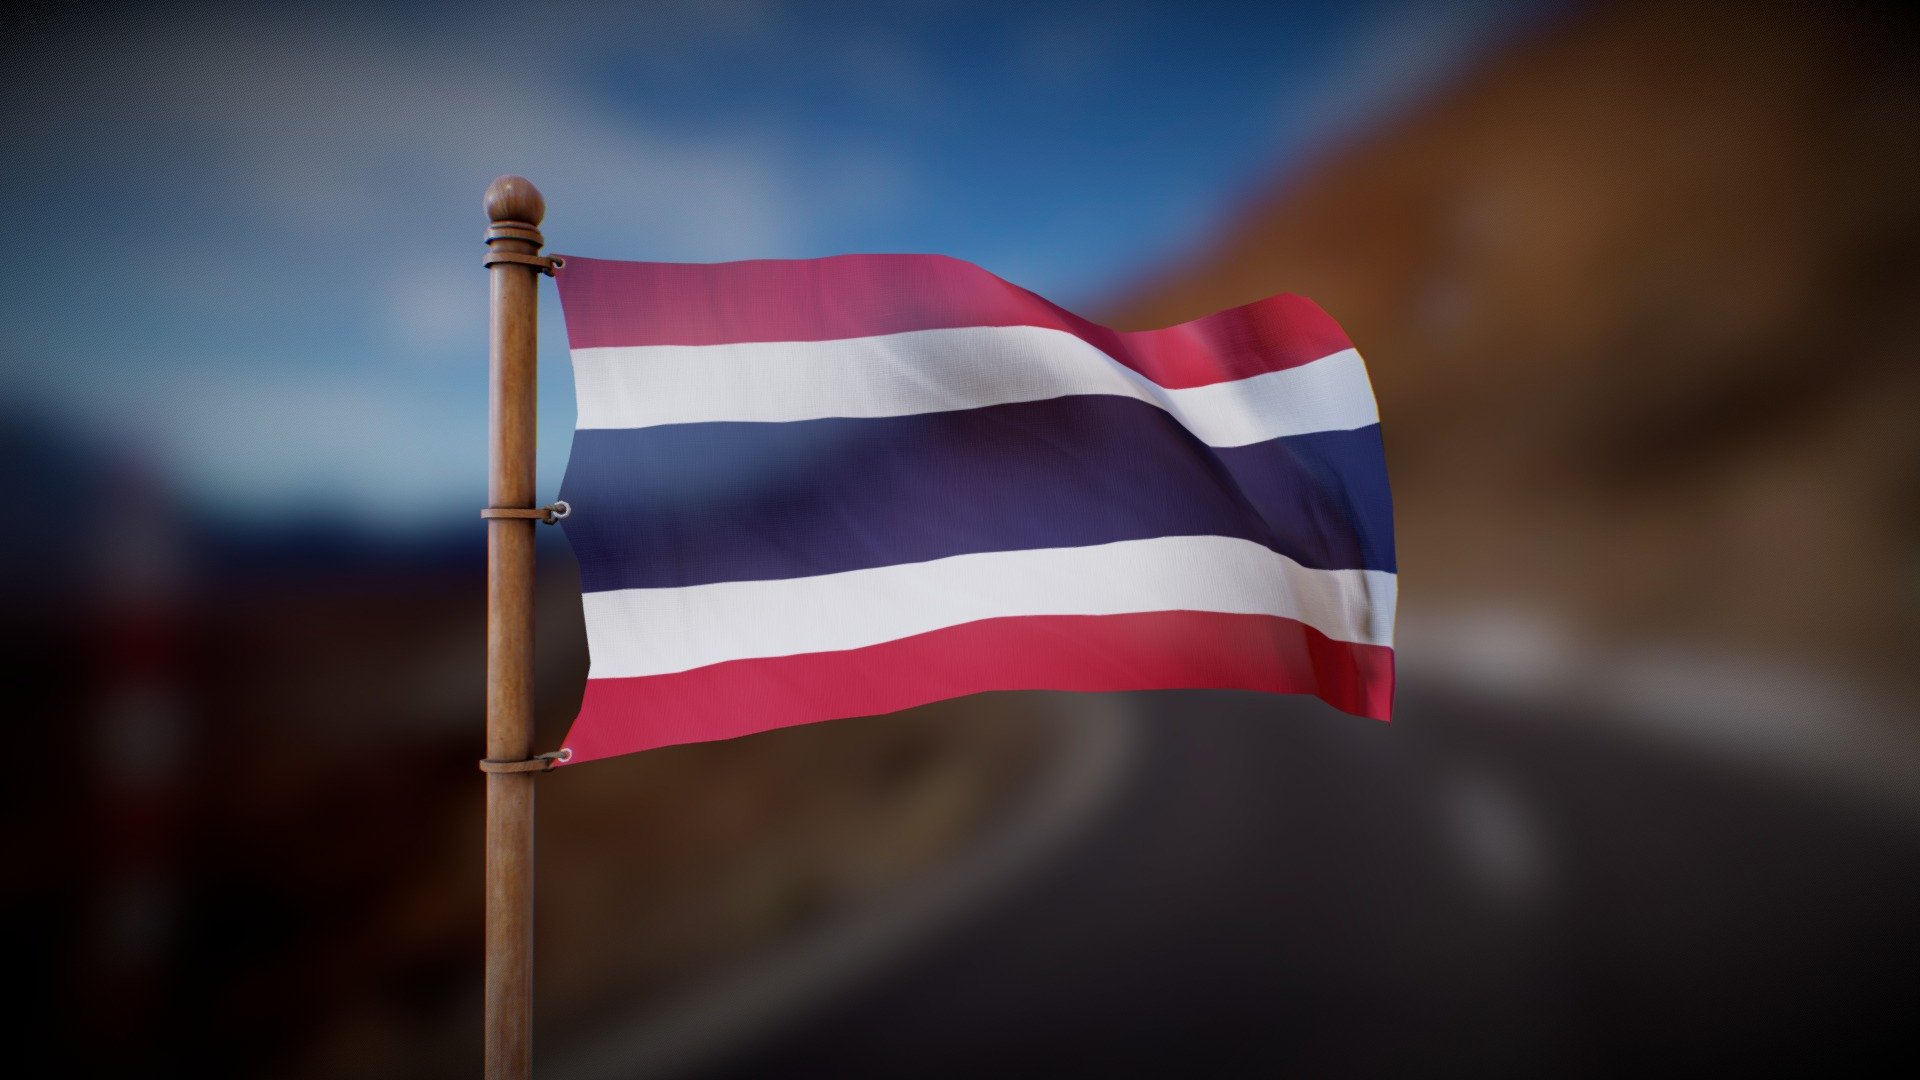 Flag waving in the wind in a looped animation

Joint Animation, perfect for any purpose
4K PBR textures

Feel free to DM me for anu question of custom requests :) - Flag of Thailand - Wind Animated Loop - Buy Royalty Free 3D model by Deftroy 3d model